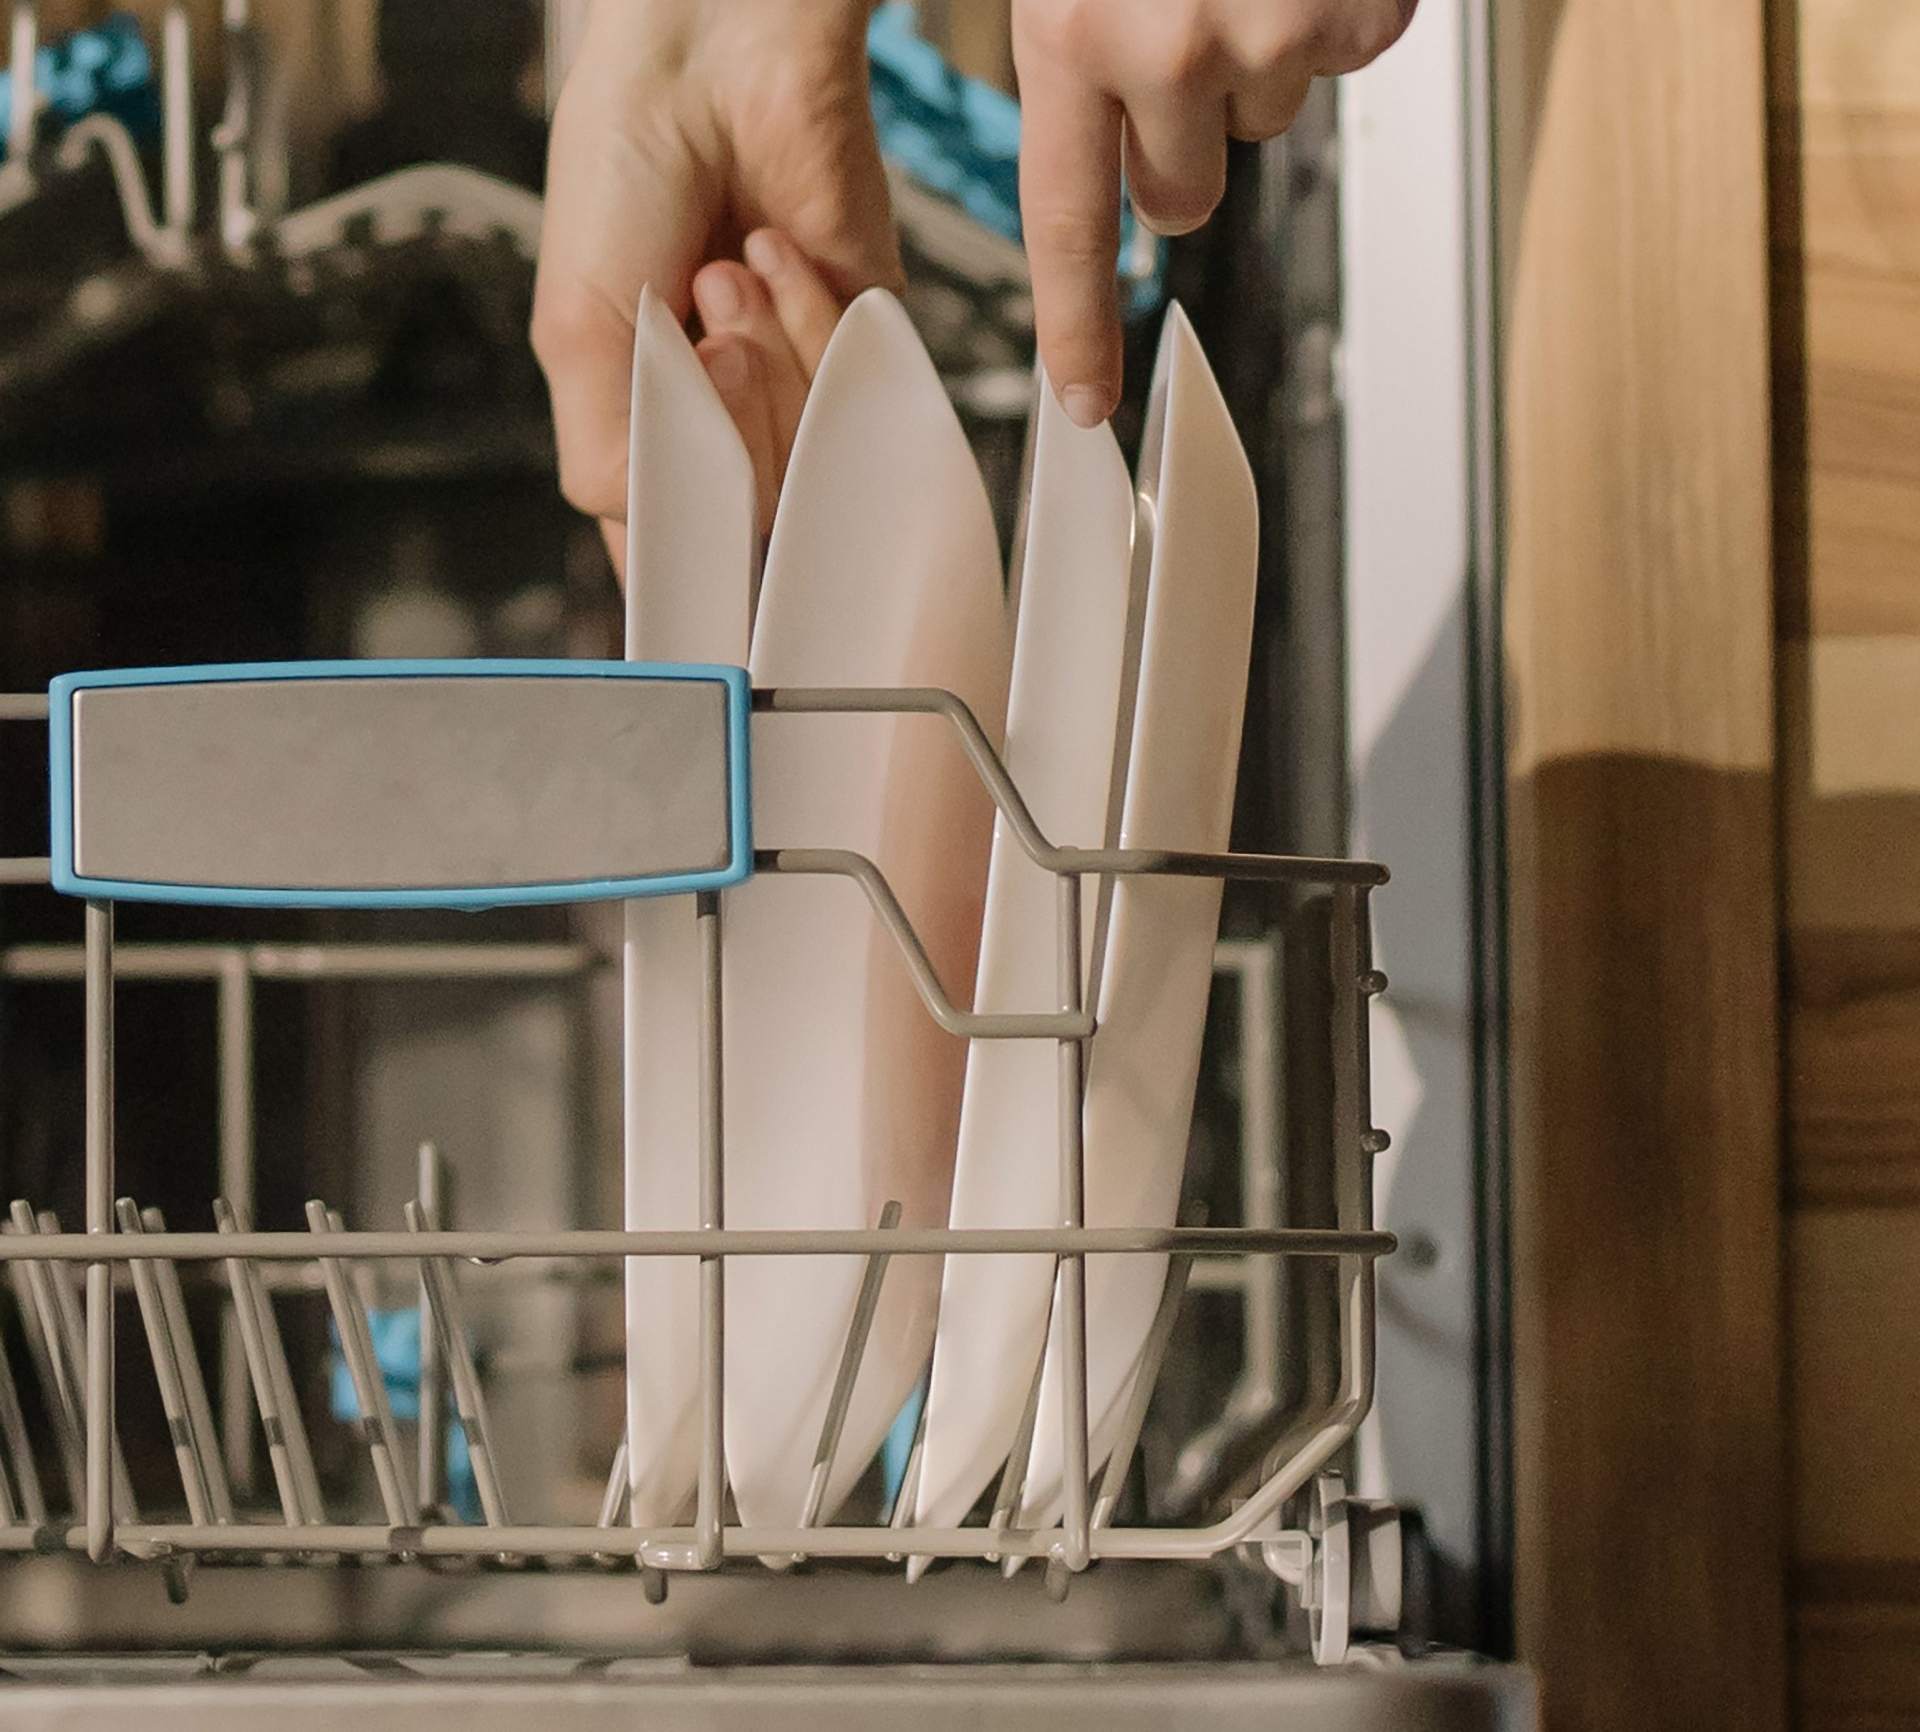 putting dishes in a dishwasher